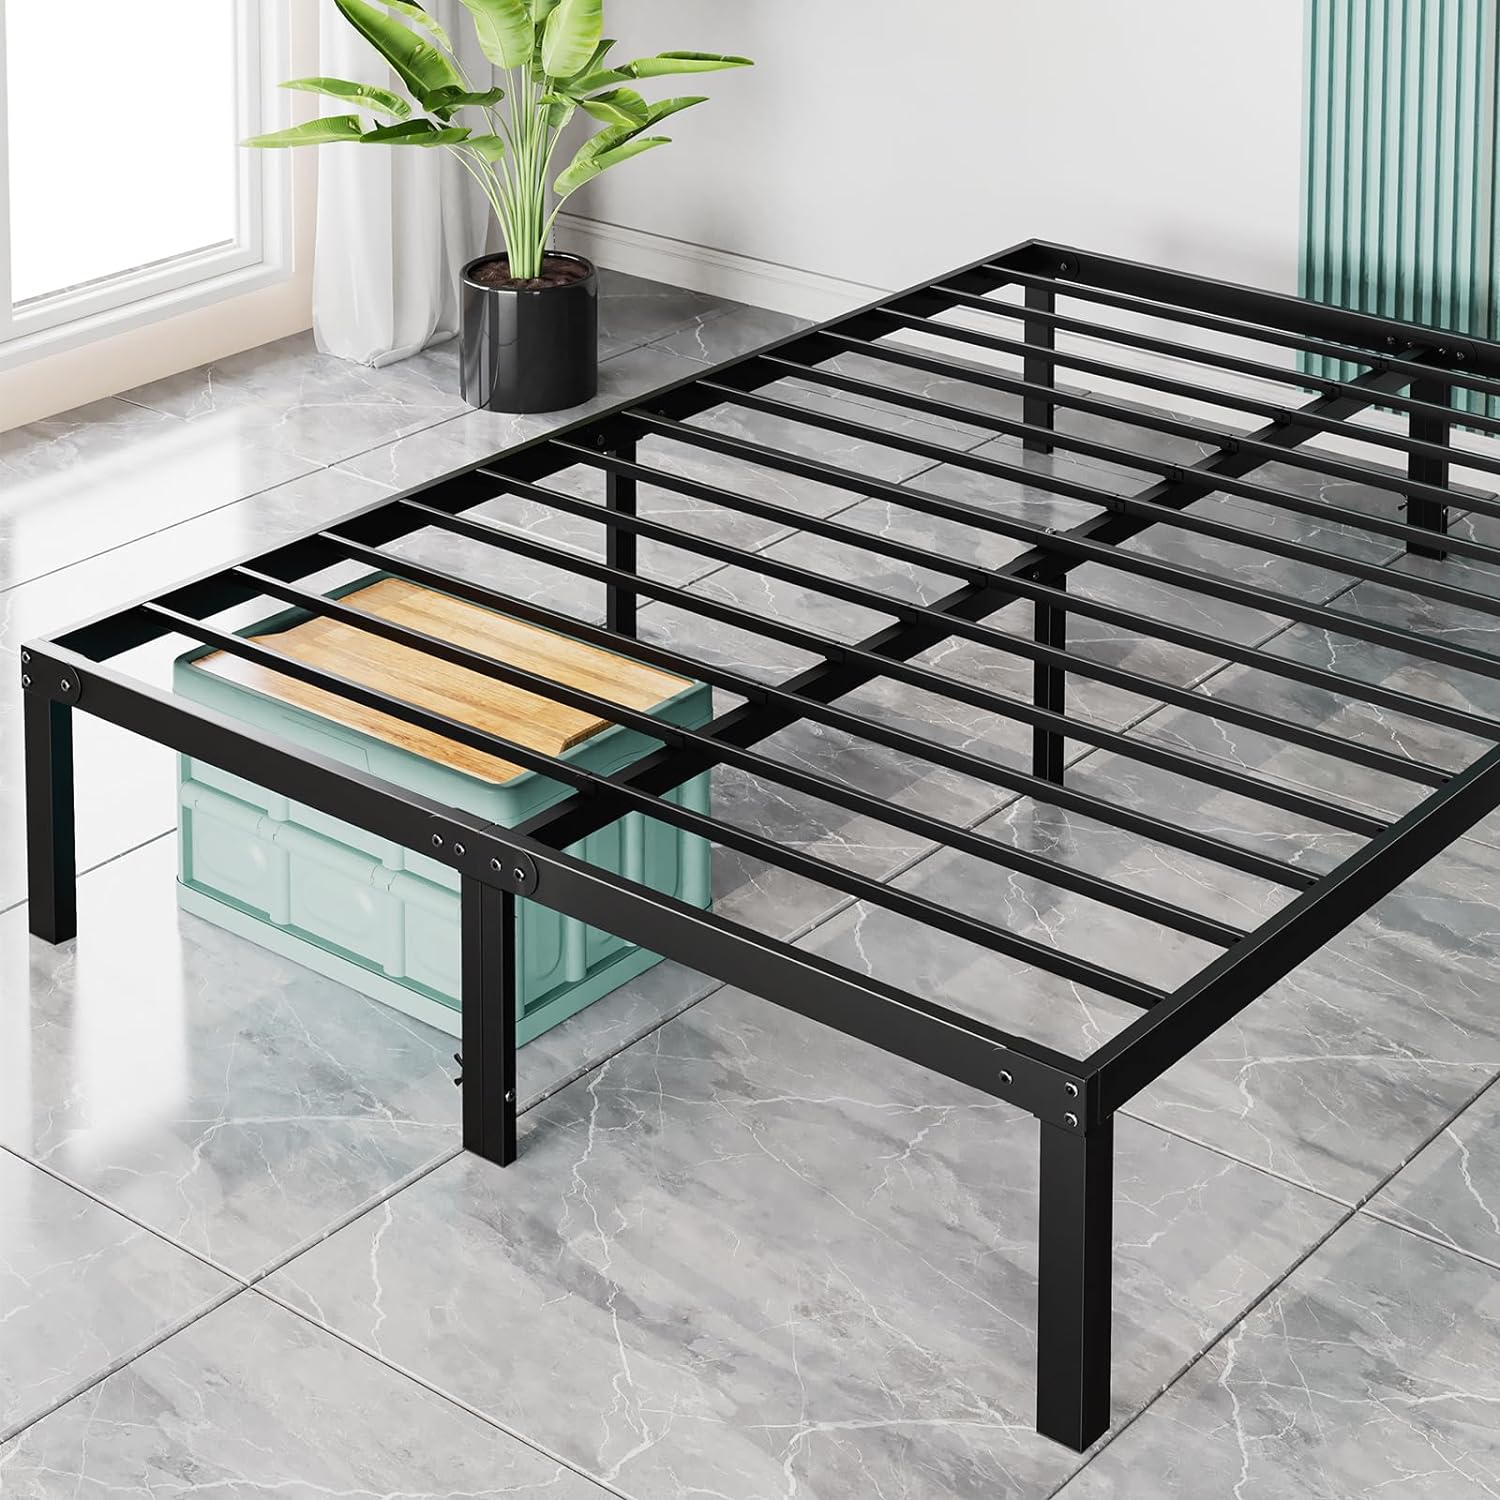 🌟 Sweetcrispy Queen Bed Frame - Metal Platform Bed Frames Queen Size with Storage Space Under Frame, Heavy Duty, 14 Inches, Sturdy Steel Slat Support, No Box Spring Needed 🌟